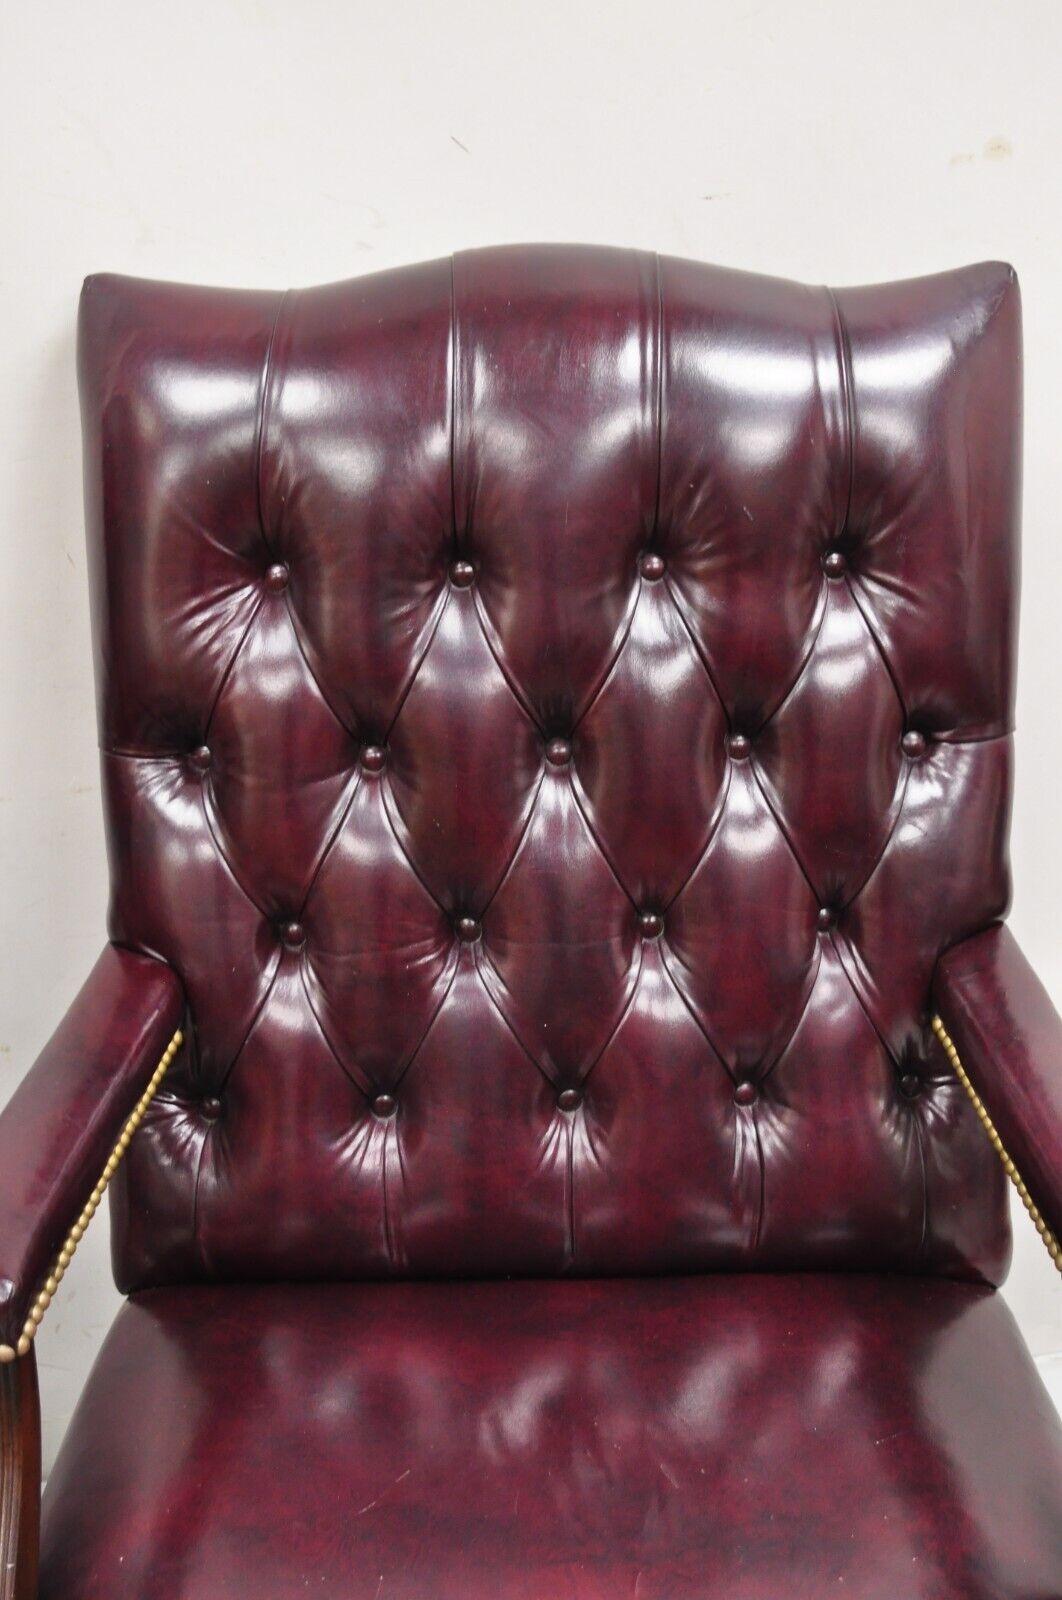 Hancock & Moore Oxblood Burgundy Leather Chesterfield Tufted Office Chairs Pair For Sale 7